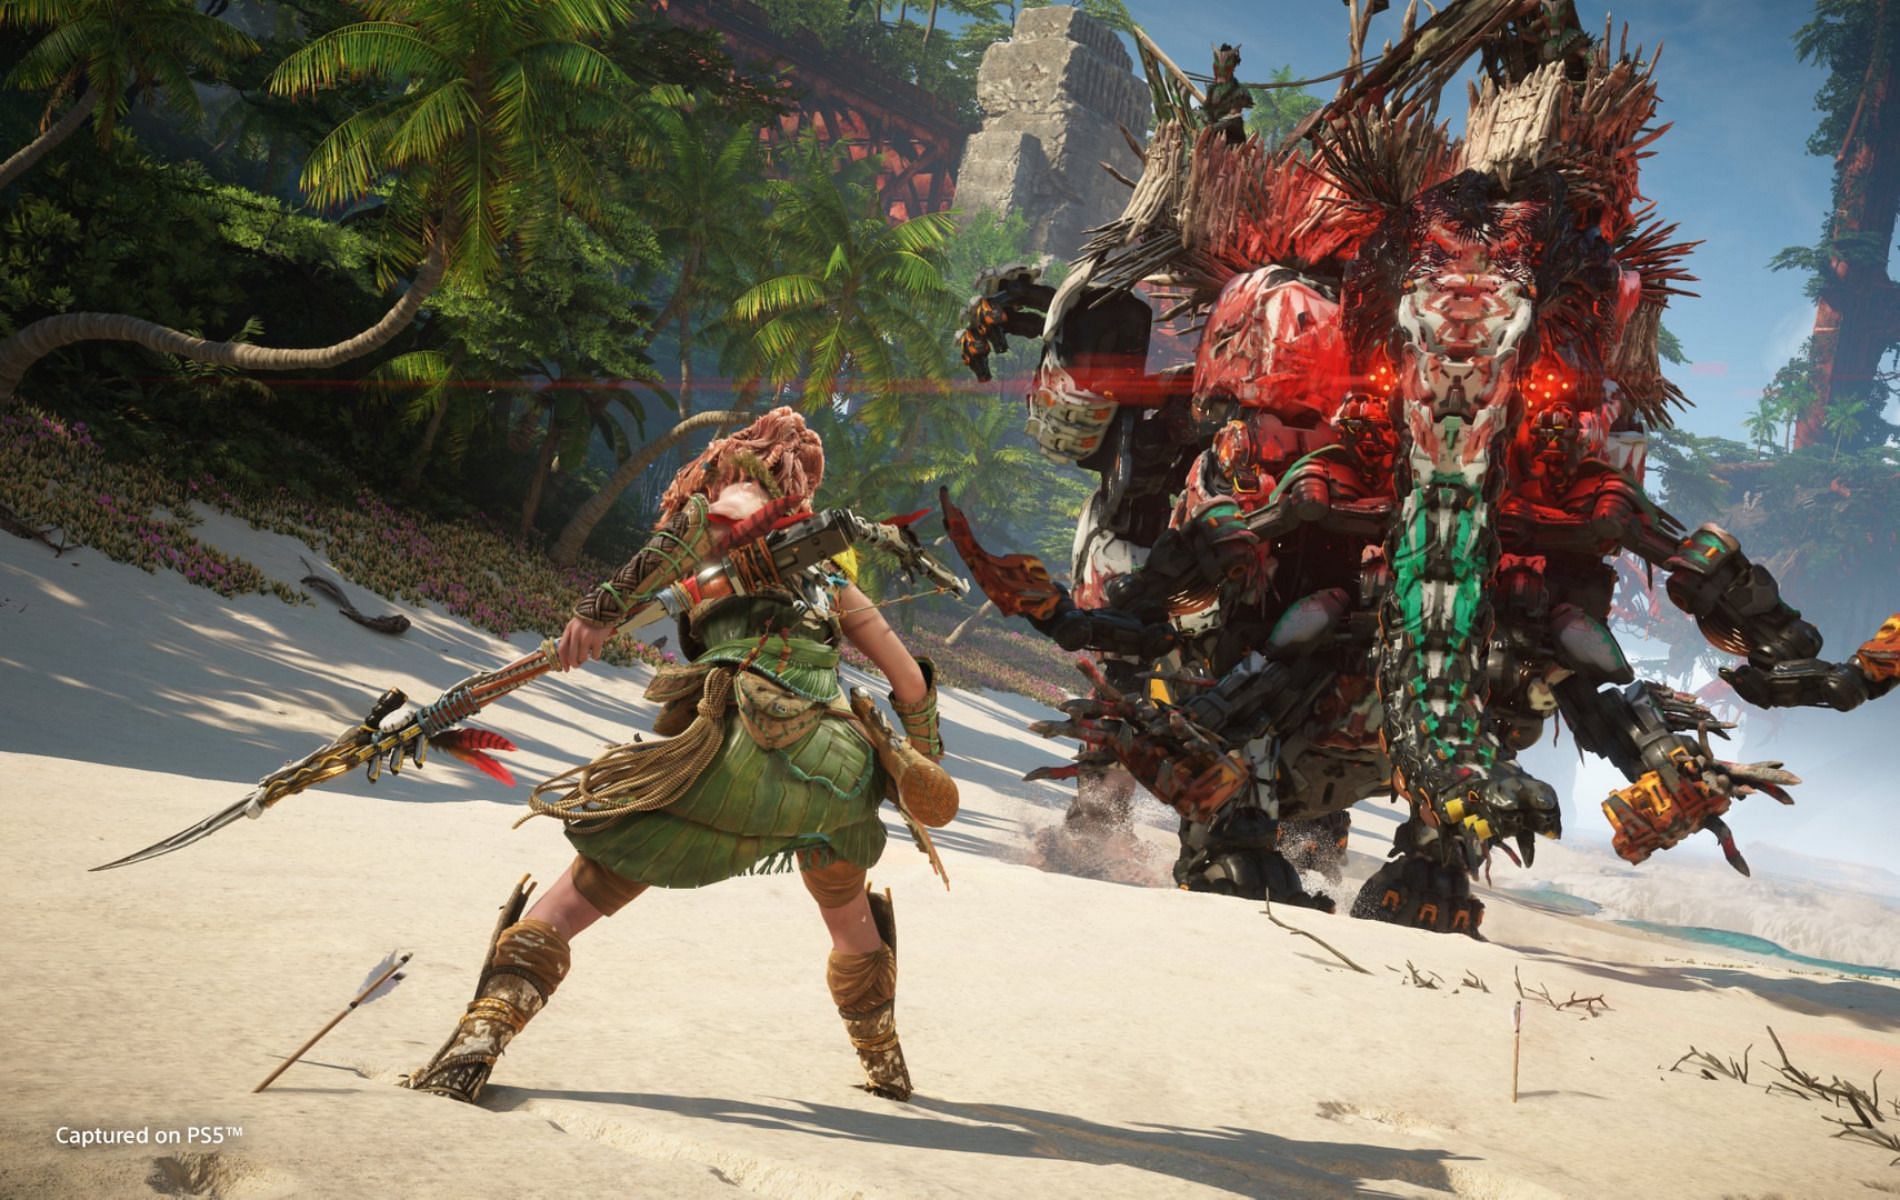 Aloy comes face to face with an adversary (Image via Guerrilla Games)